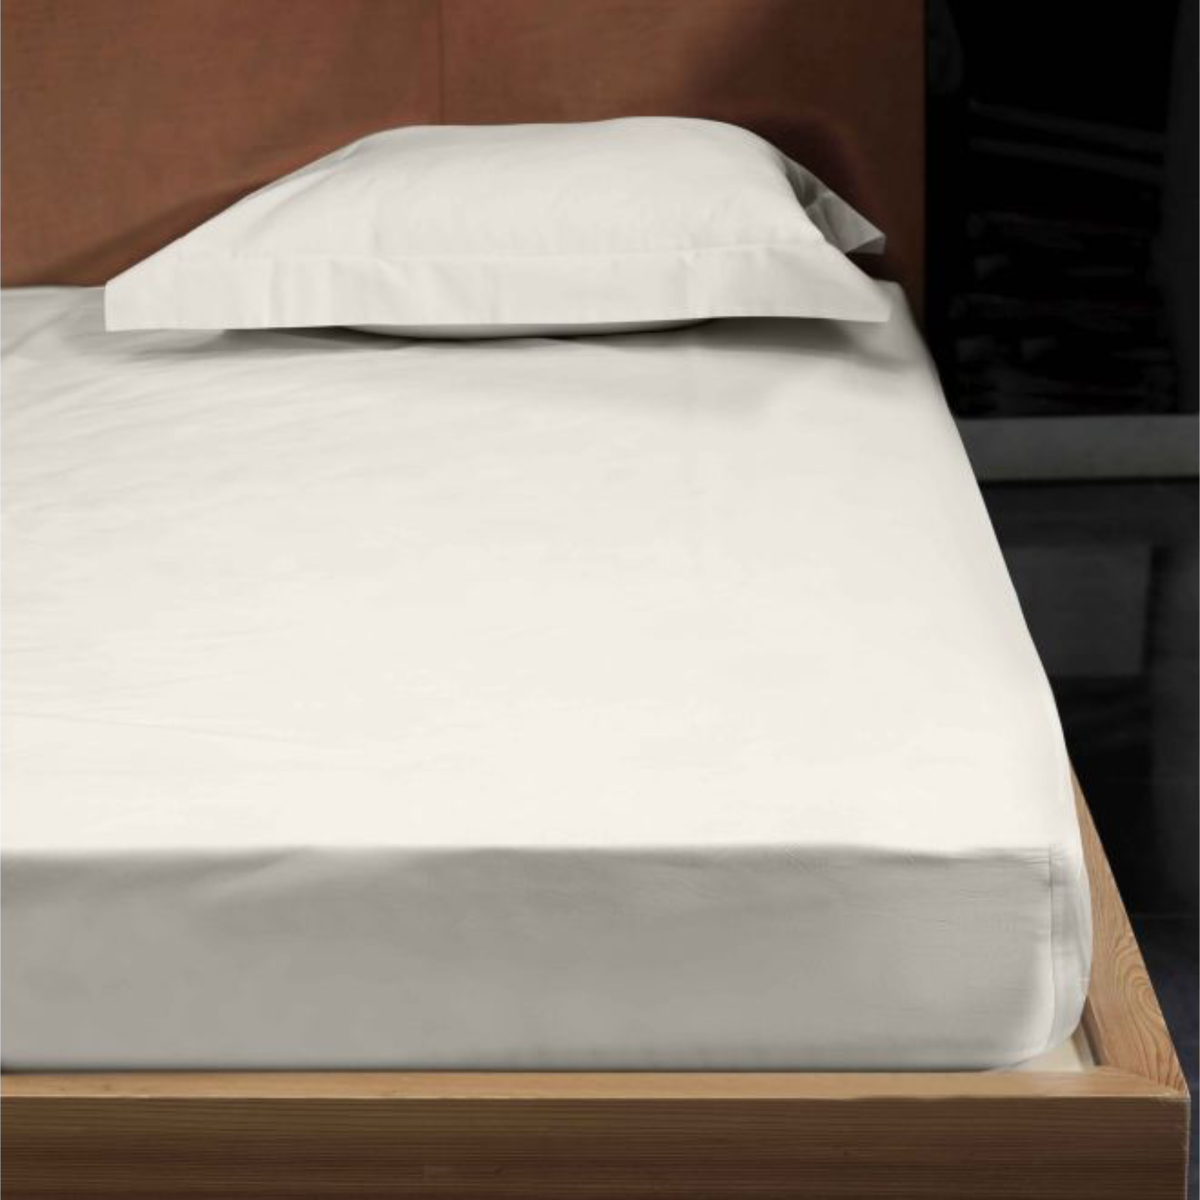 Fitted Bed Sheet of Signoria Gemma Bedding in Ivory Color